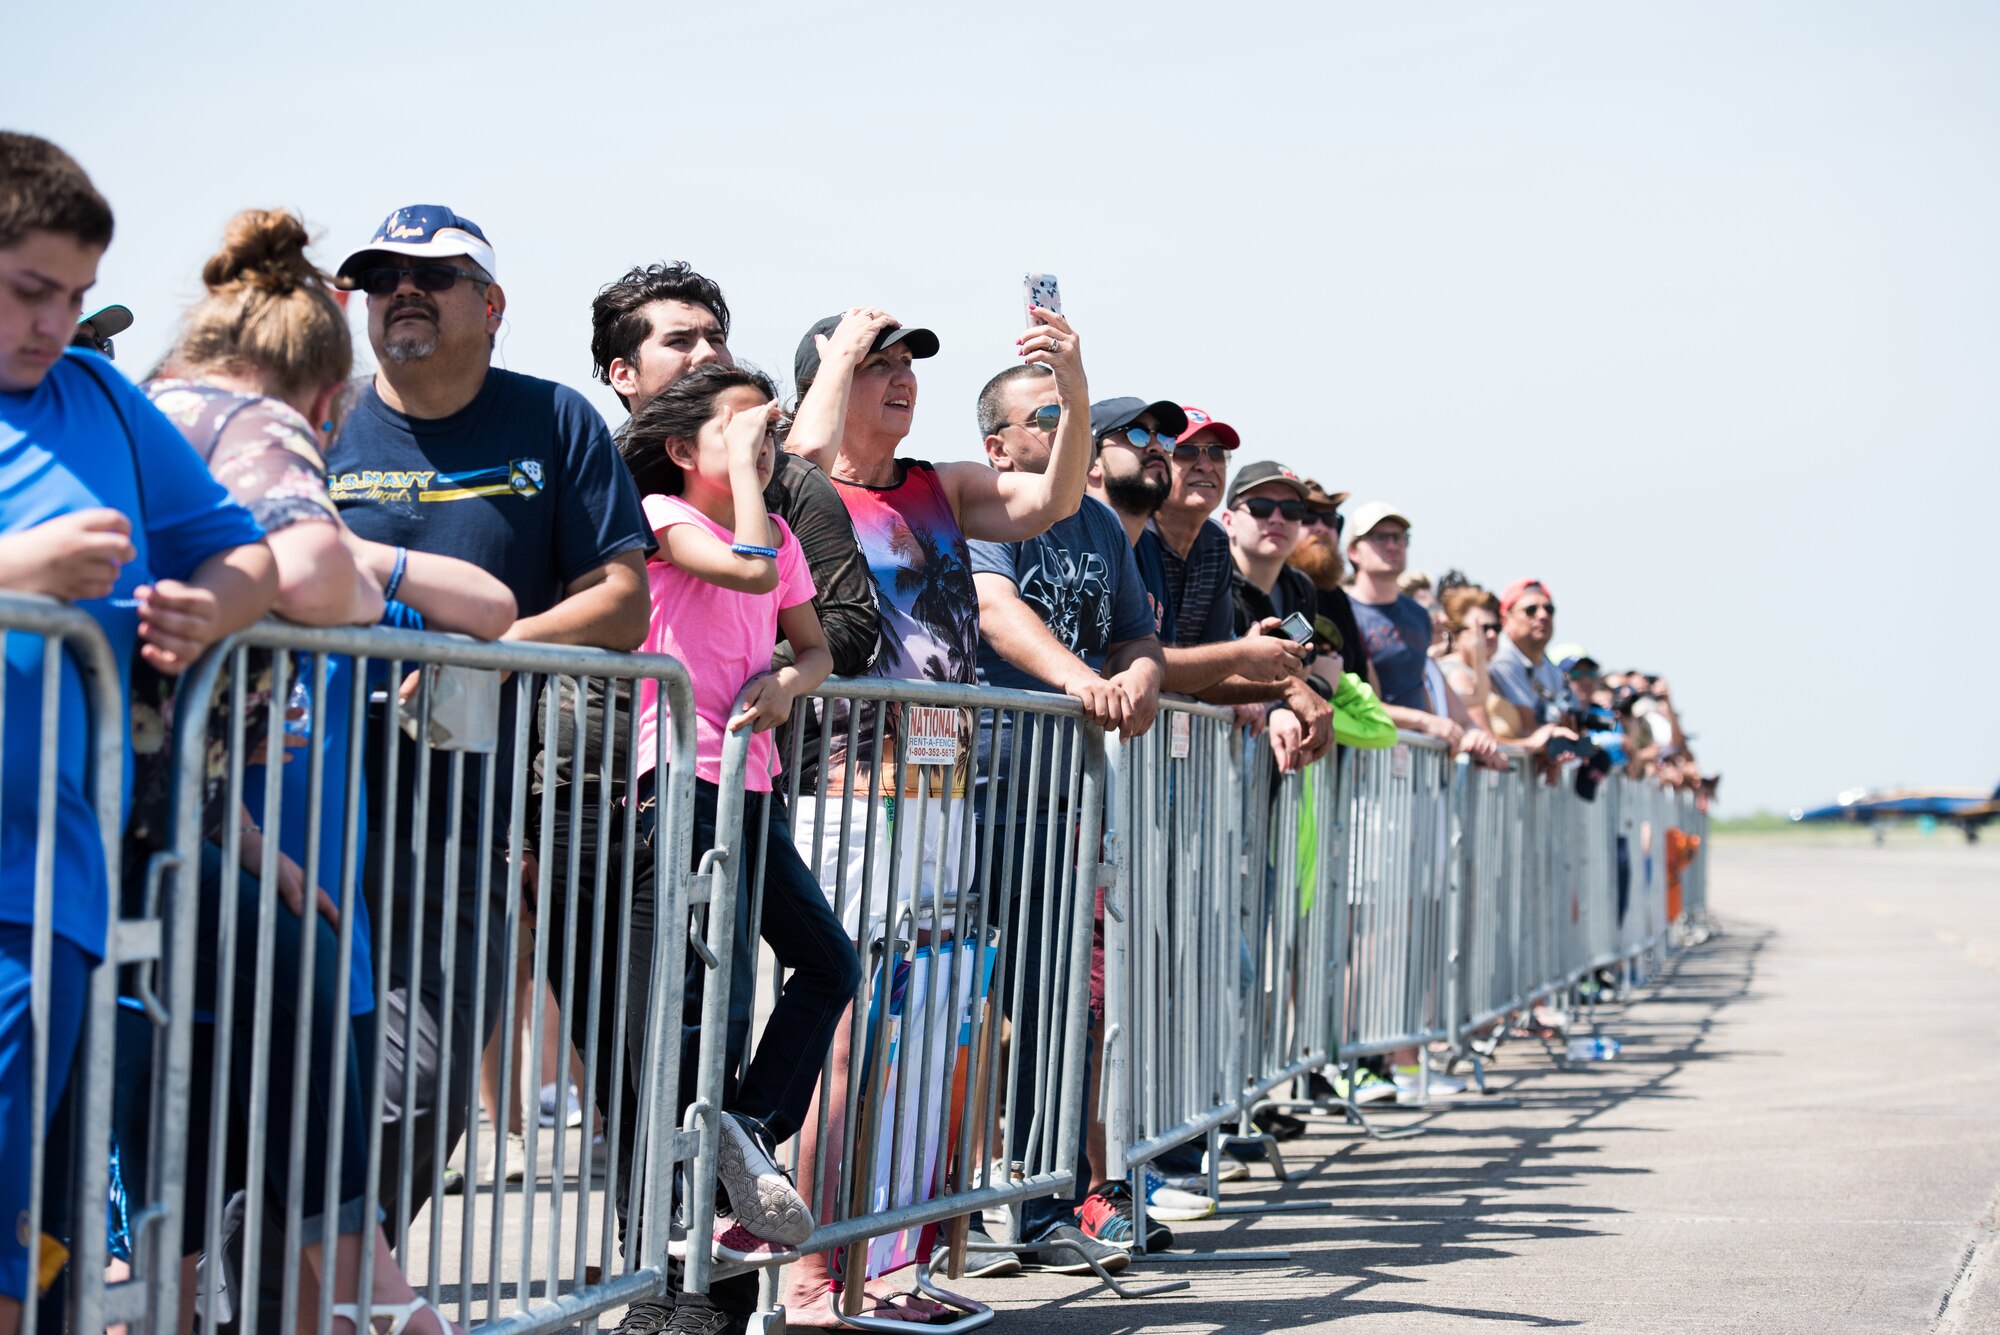 A crowd of air show guests view the F-35 Heritage Flight Team Demonstration during the Wings Over South Texas air show at Naval Air Station Kingsville, Texas, March 25, 2018. During the two-day event, approximately 100,000 guests from all across the United States attended the WOST air show. (U.S. Air Force photo by Airman 1st Class Alexander Cook)